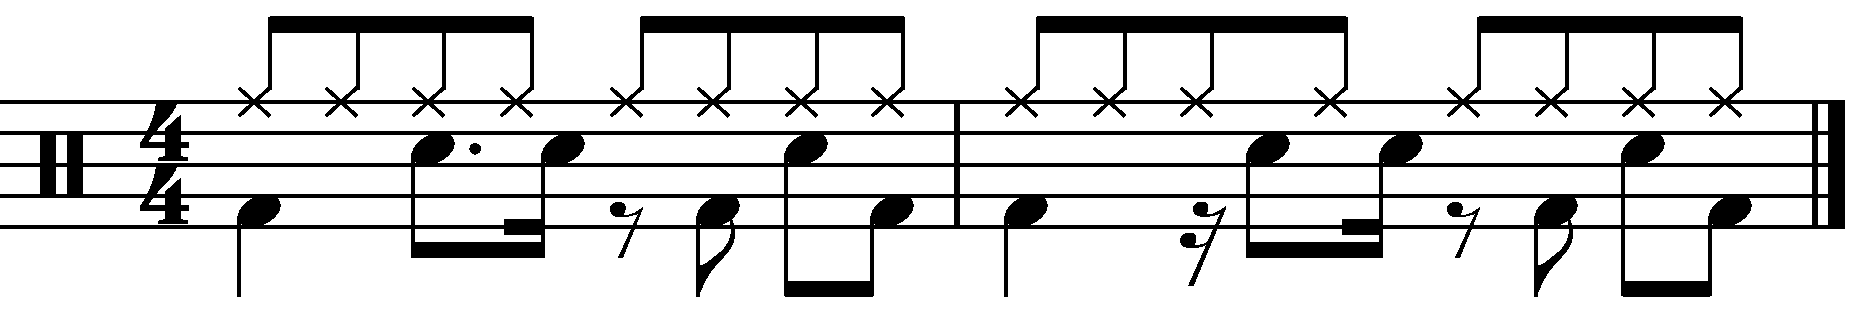 A two bar groove built around 16th note displacement